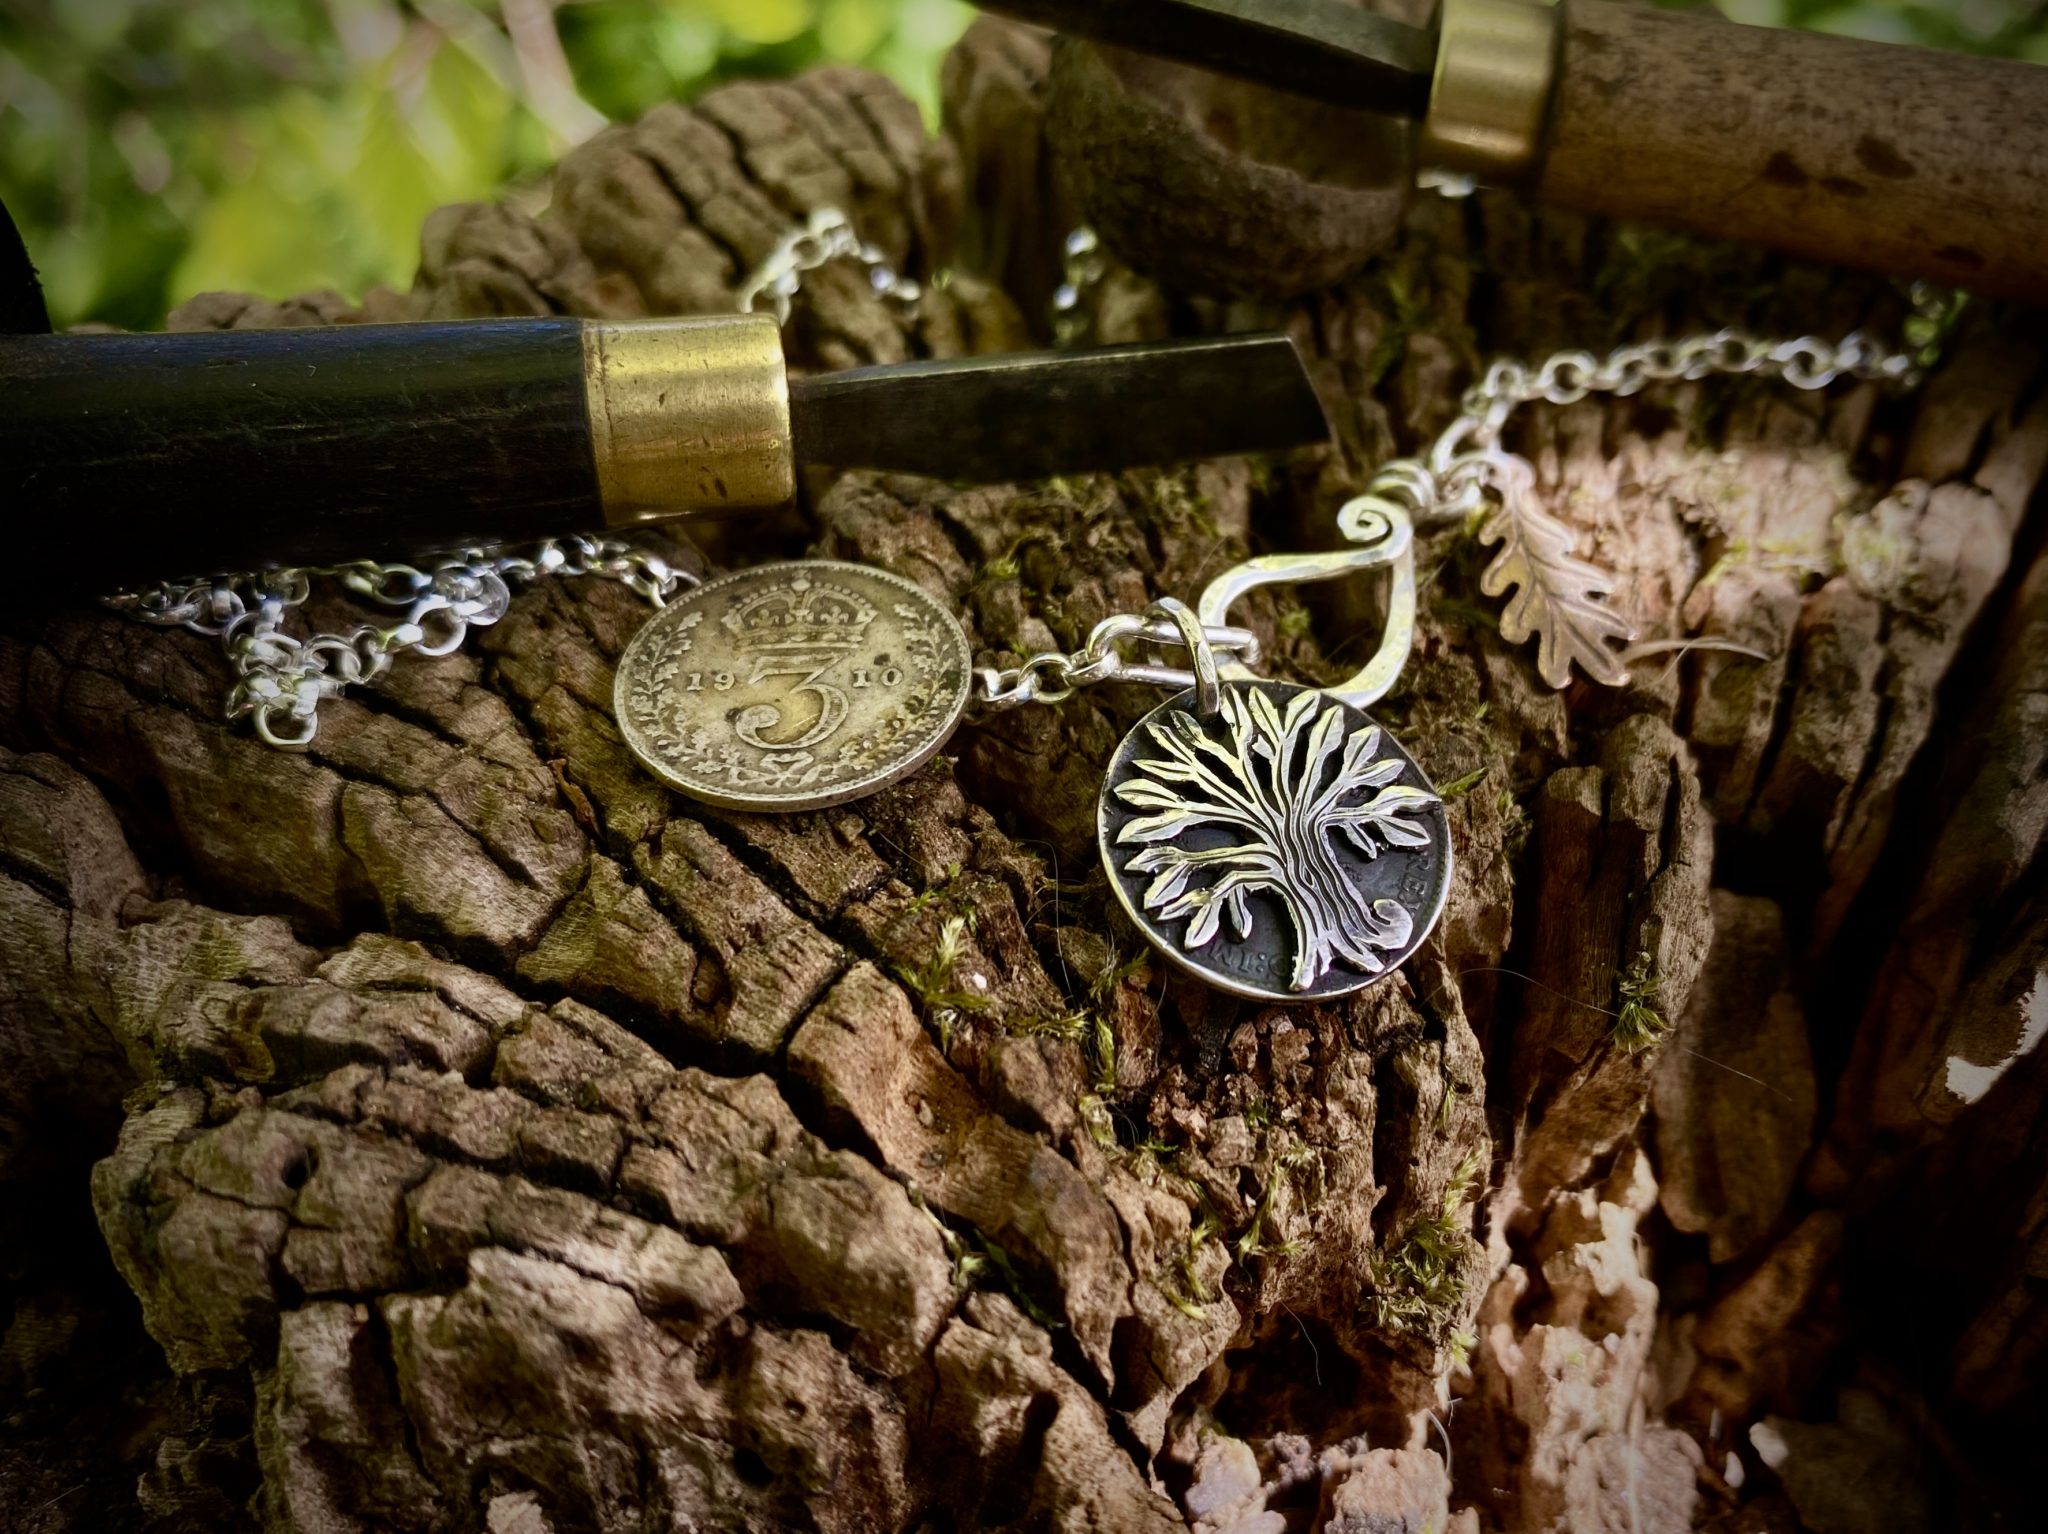 Tree necklace pendant - Recycled silver threepence coins